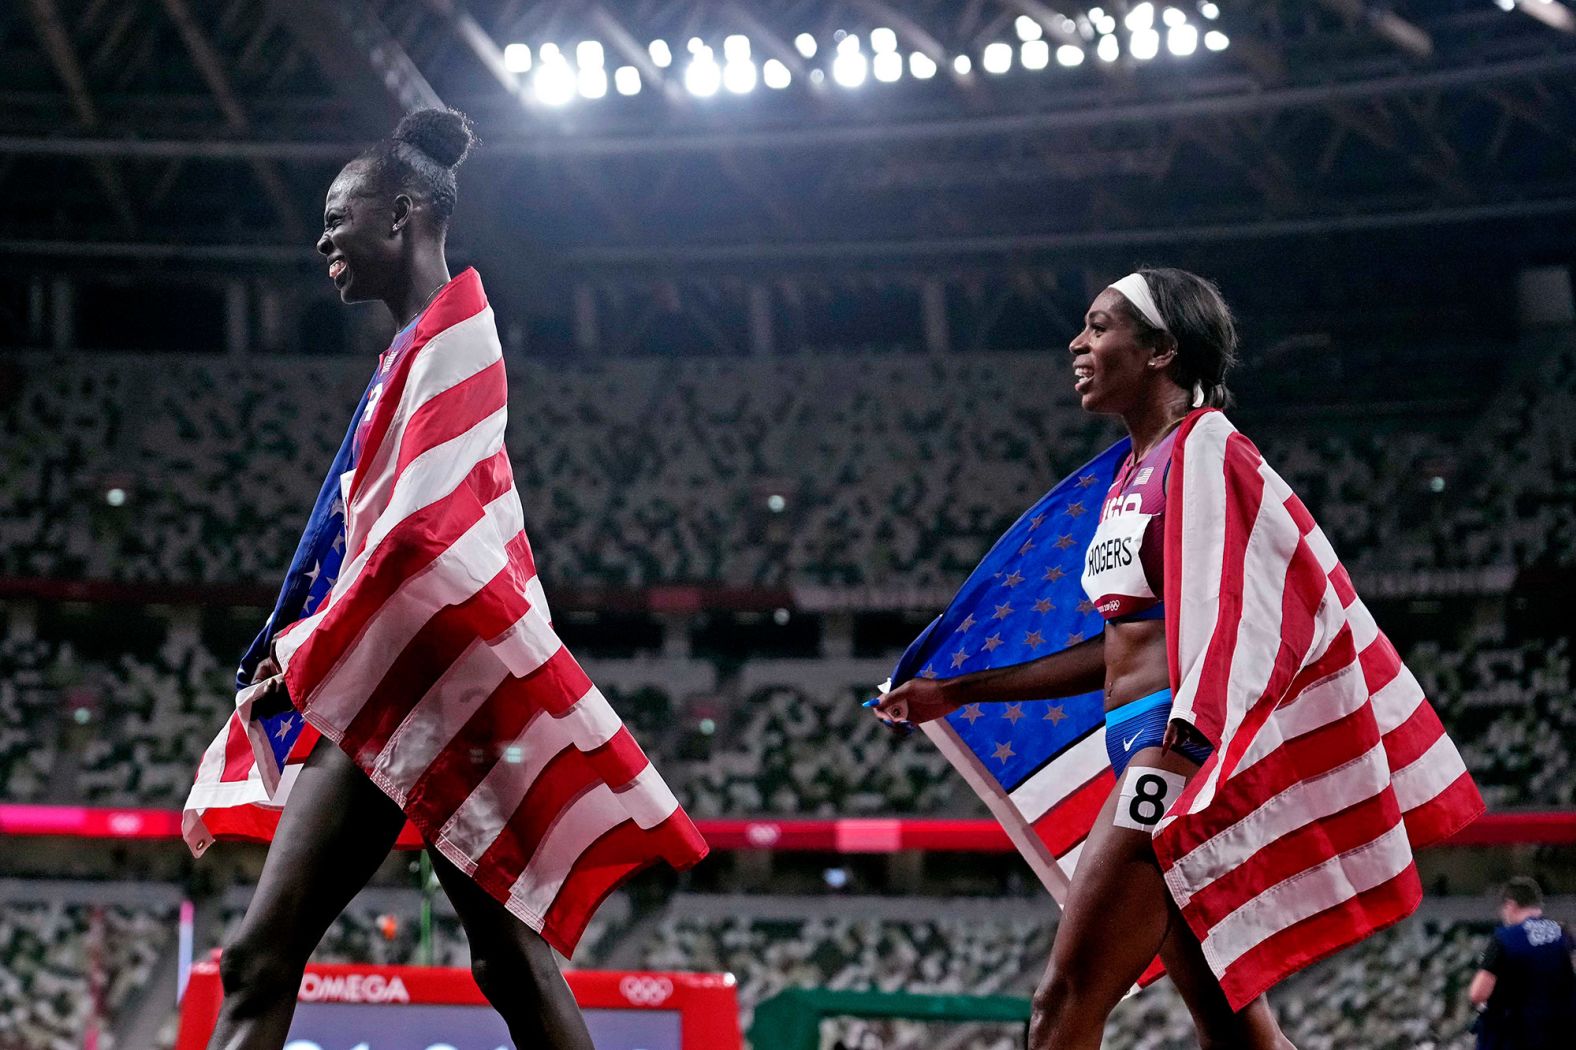 American runners Athing Mu, left, and Raevyn Rogers celebrate after the 800 meters on August 3. Mu, 19, won the gold and is <a href="index.php?page=&url=https%3A%2F%2Fwww.cnn.com%2Fworld%2Flive-news%2Ftokyo-2020-olympics-08-03-21-spt%2Fh_4ae43952a2625a65718b5cbc88da554d" target="_blank">the second-youngest 800-meter champion in history.</a> Rodgers won the bronze.